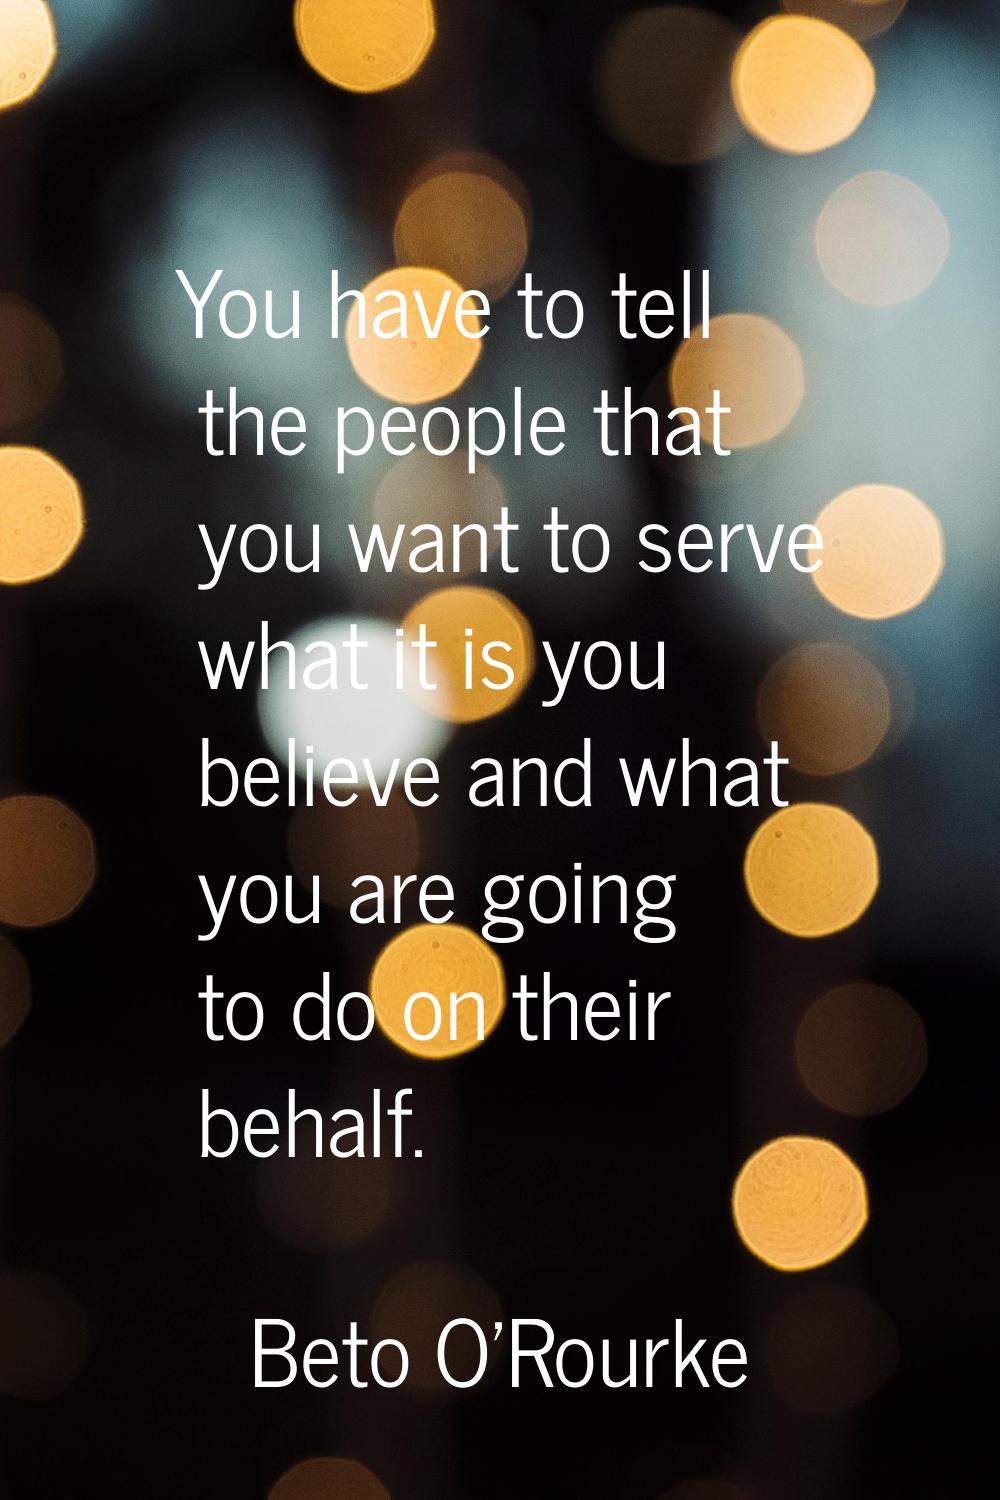 You have to tell the people that you want to serve what it is you believe and what you are going to